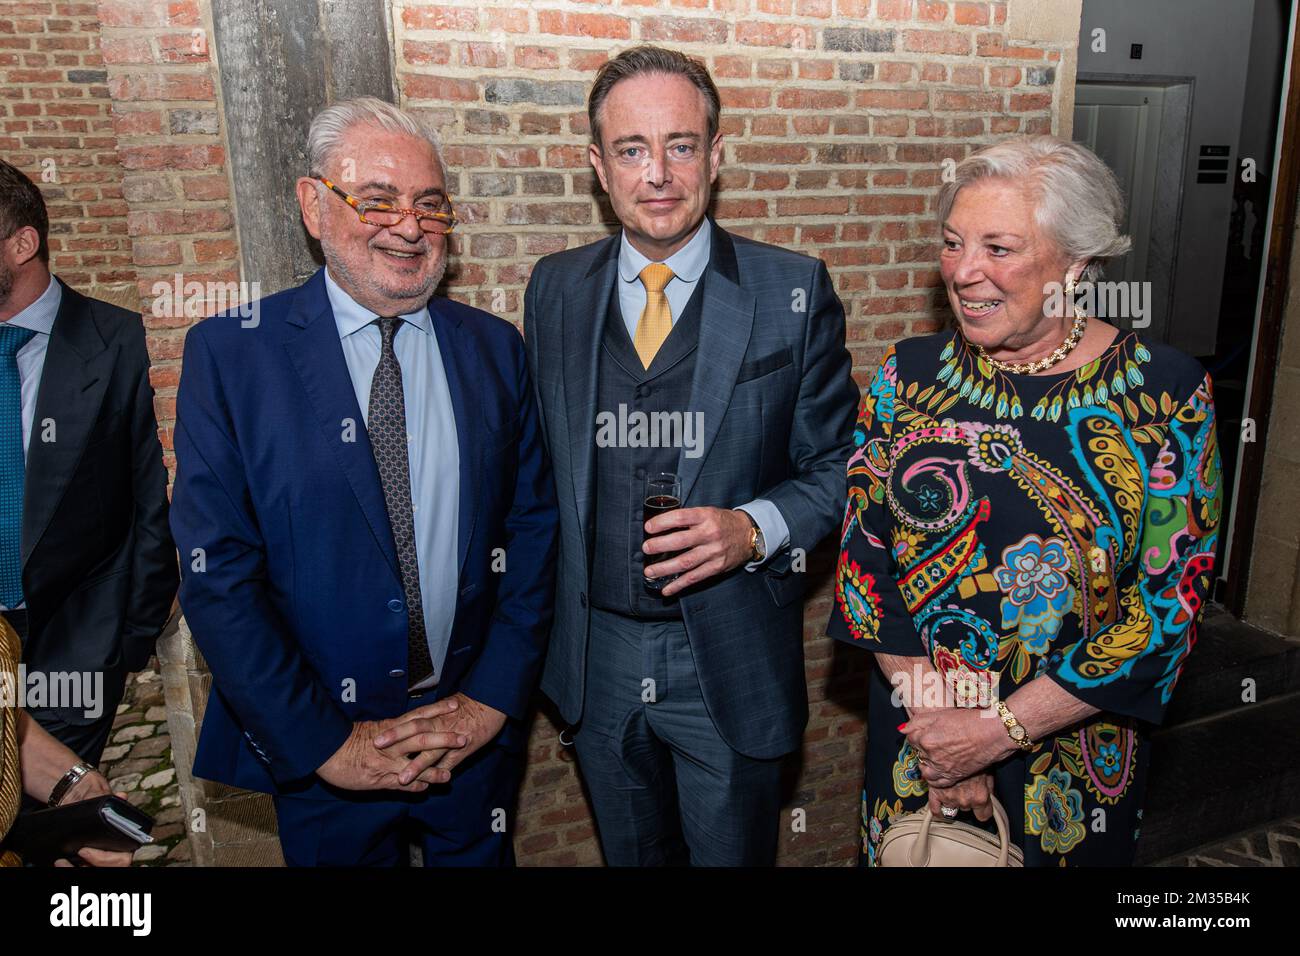 Antwerp Mayor Bart De Wever (C), Katoen Natie CEO Fernand Huts (L) and Huts' wife Karine (R) pictured during the key handover of the iconic 'Boerentoren' KBC tower in the center of Antwerp, Sunday 11 July 2021. Original owner KBC Bank sold the landmark building, built in 1930 in Art-Deco style, to Katoen Natie Group. The tower will be turned into a 'Culture Tower', with room for shops, offices and homes. The reconstruction and conversion will take some 6 years. BELGA PHOTO JONAS ROOSENS Stock Photo